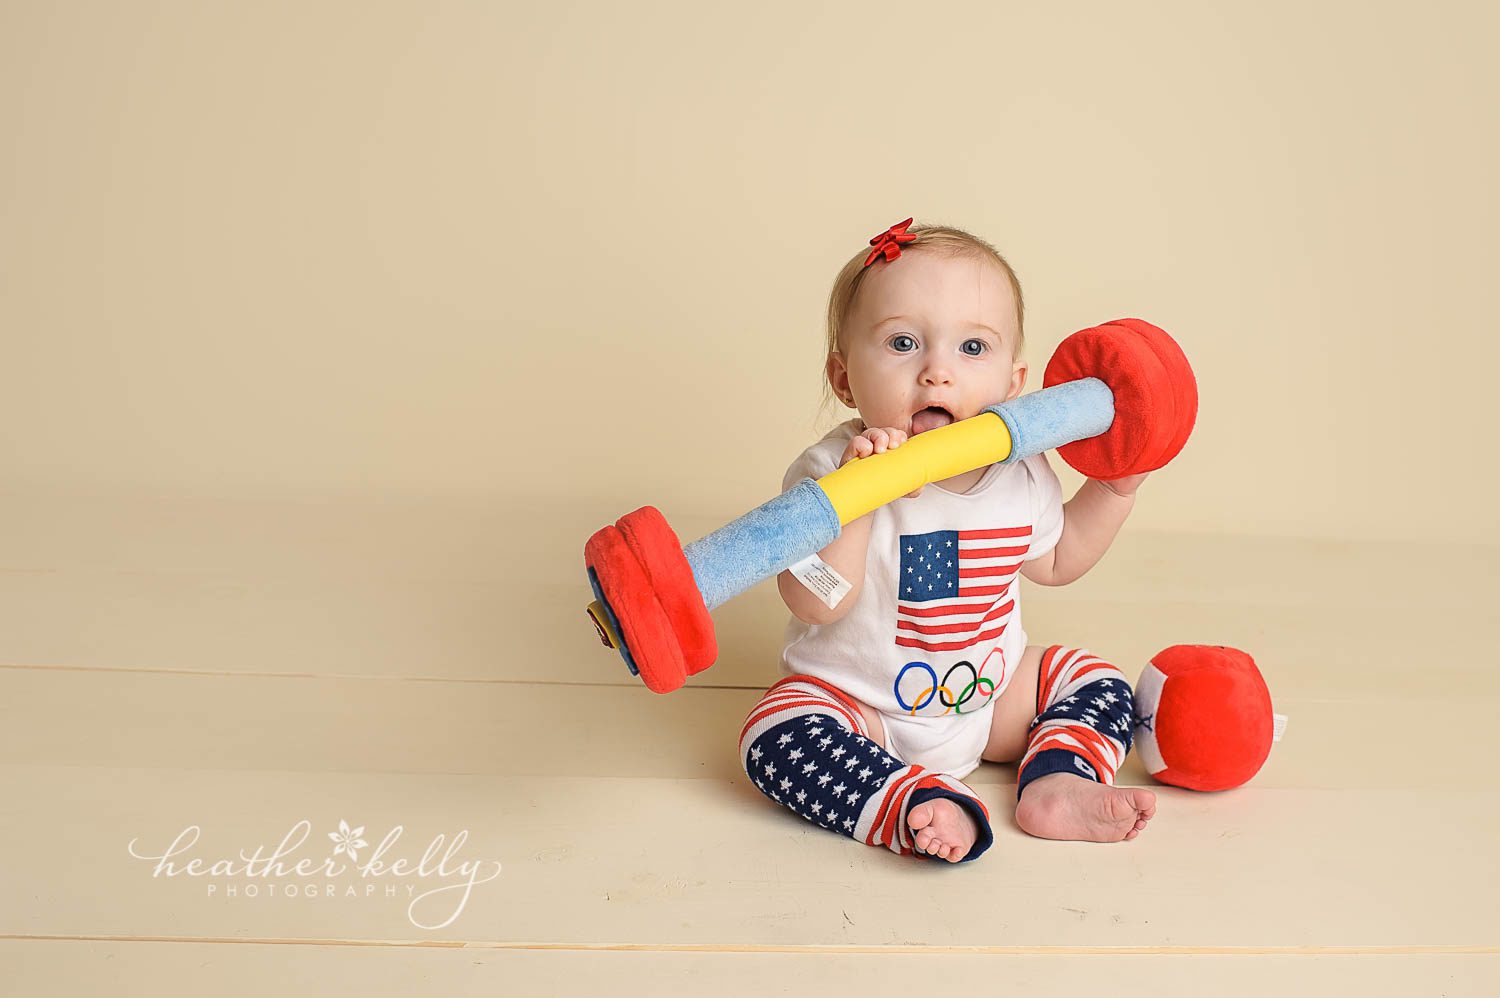 crossfit baby by ct baby photographer heather kelly photography